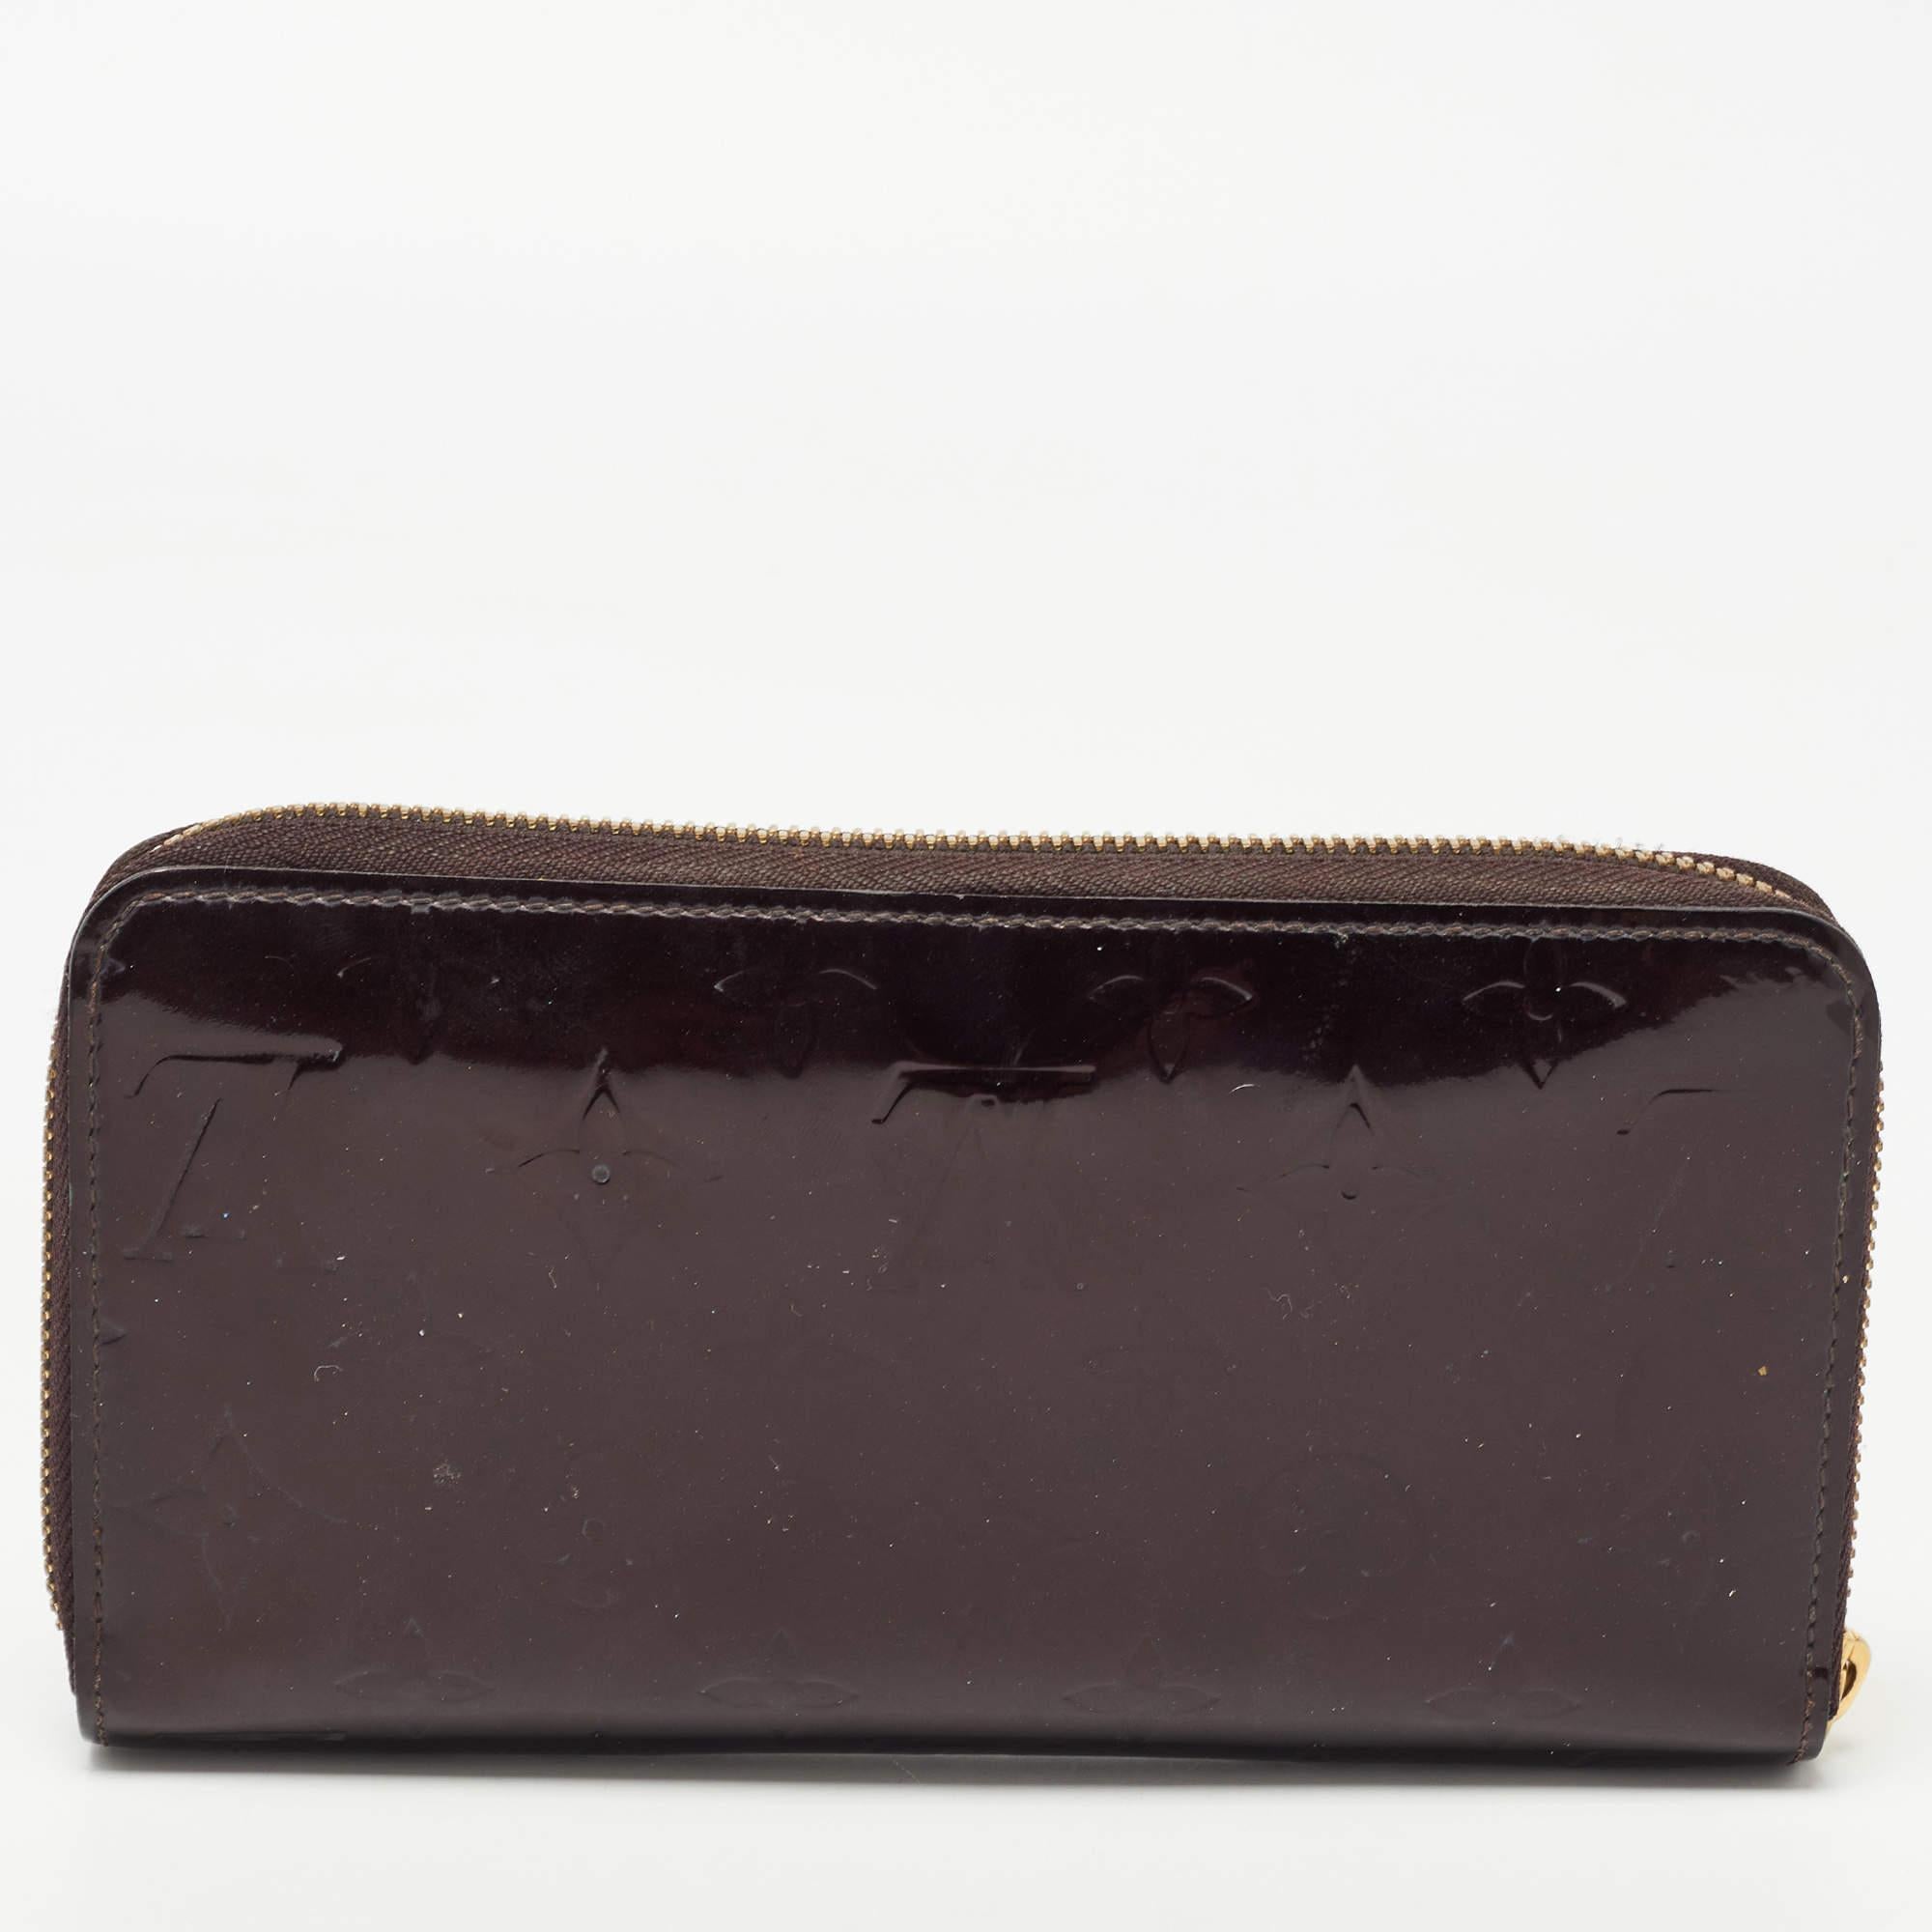 This Louis Vuitton Zippy wallet is conveniently designed for everyday use. Crafted from Amarante Monogram Vernis , it is paired with a zip-around closure and gold-tone hardware. The compartmentalized interior of the wallet will store your card and